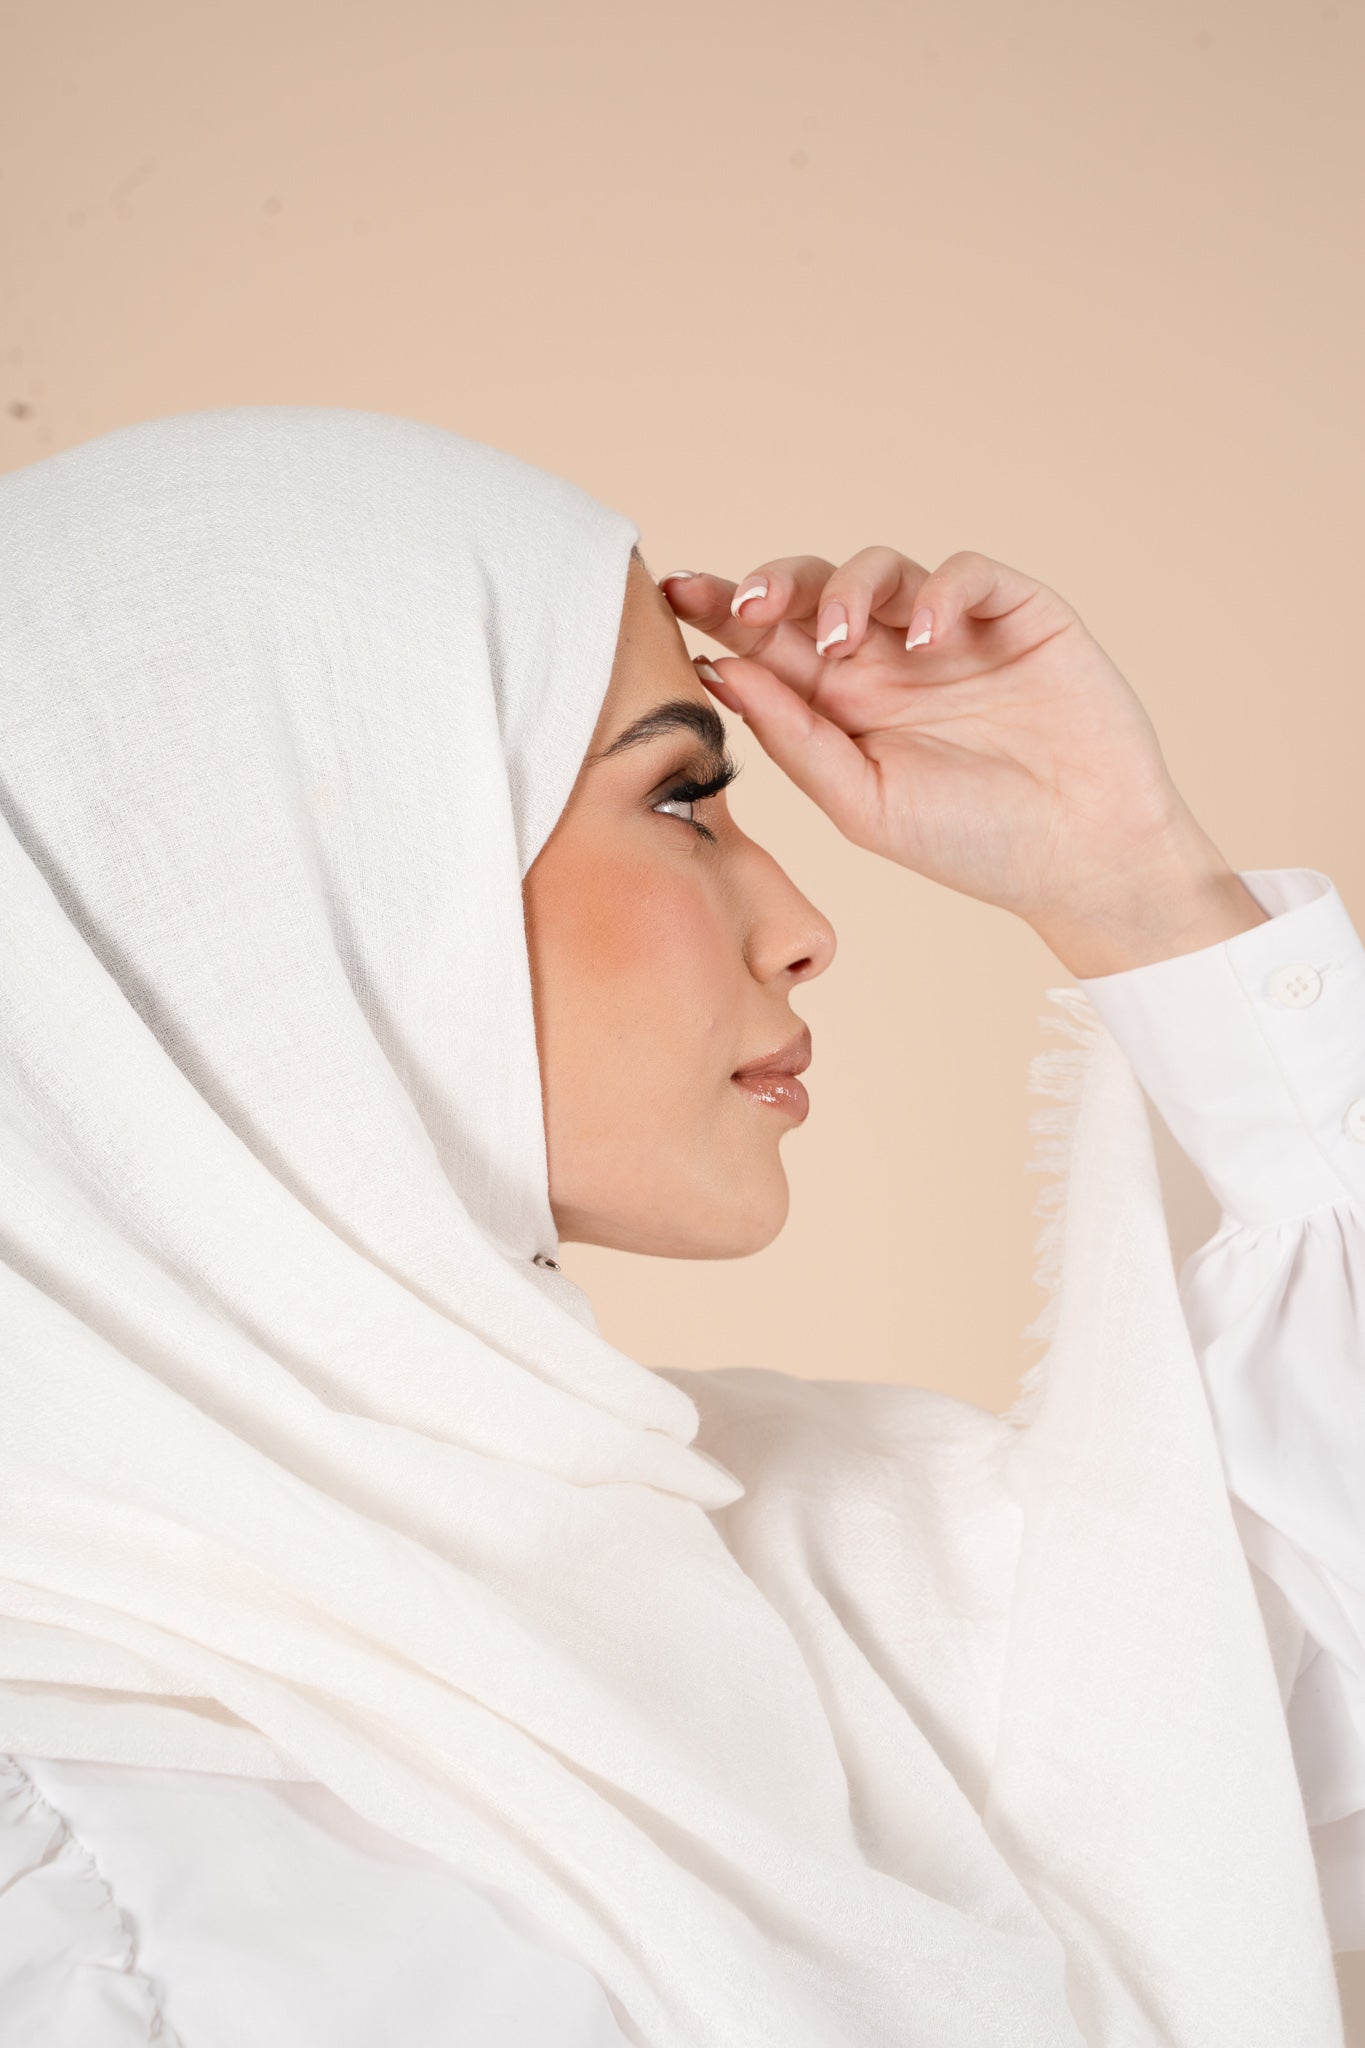 Oyster White Cotton & Wool Hijab - CAVE